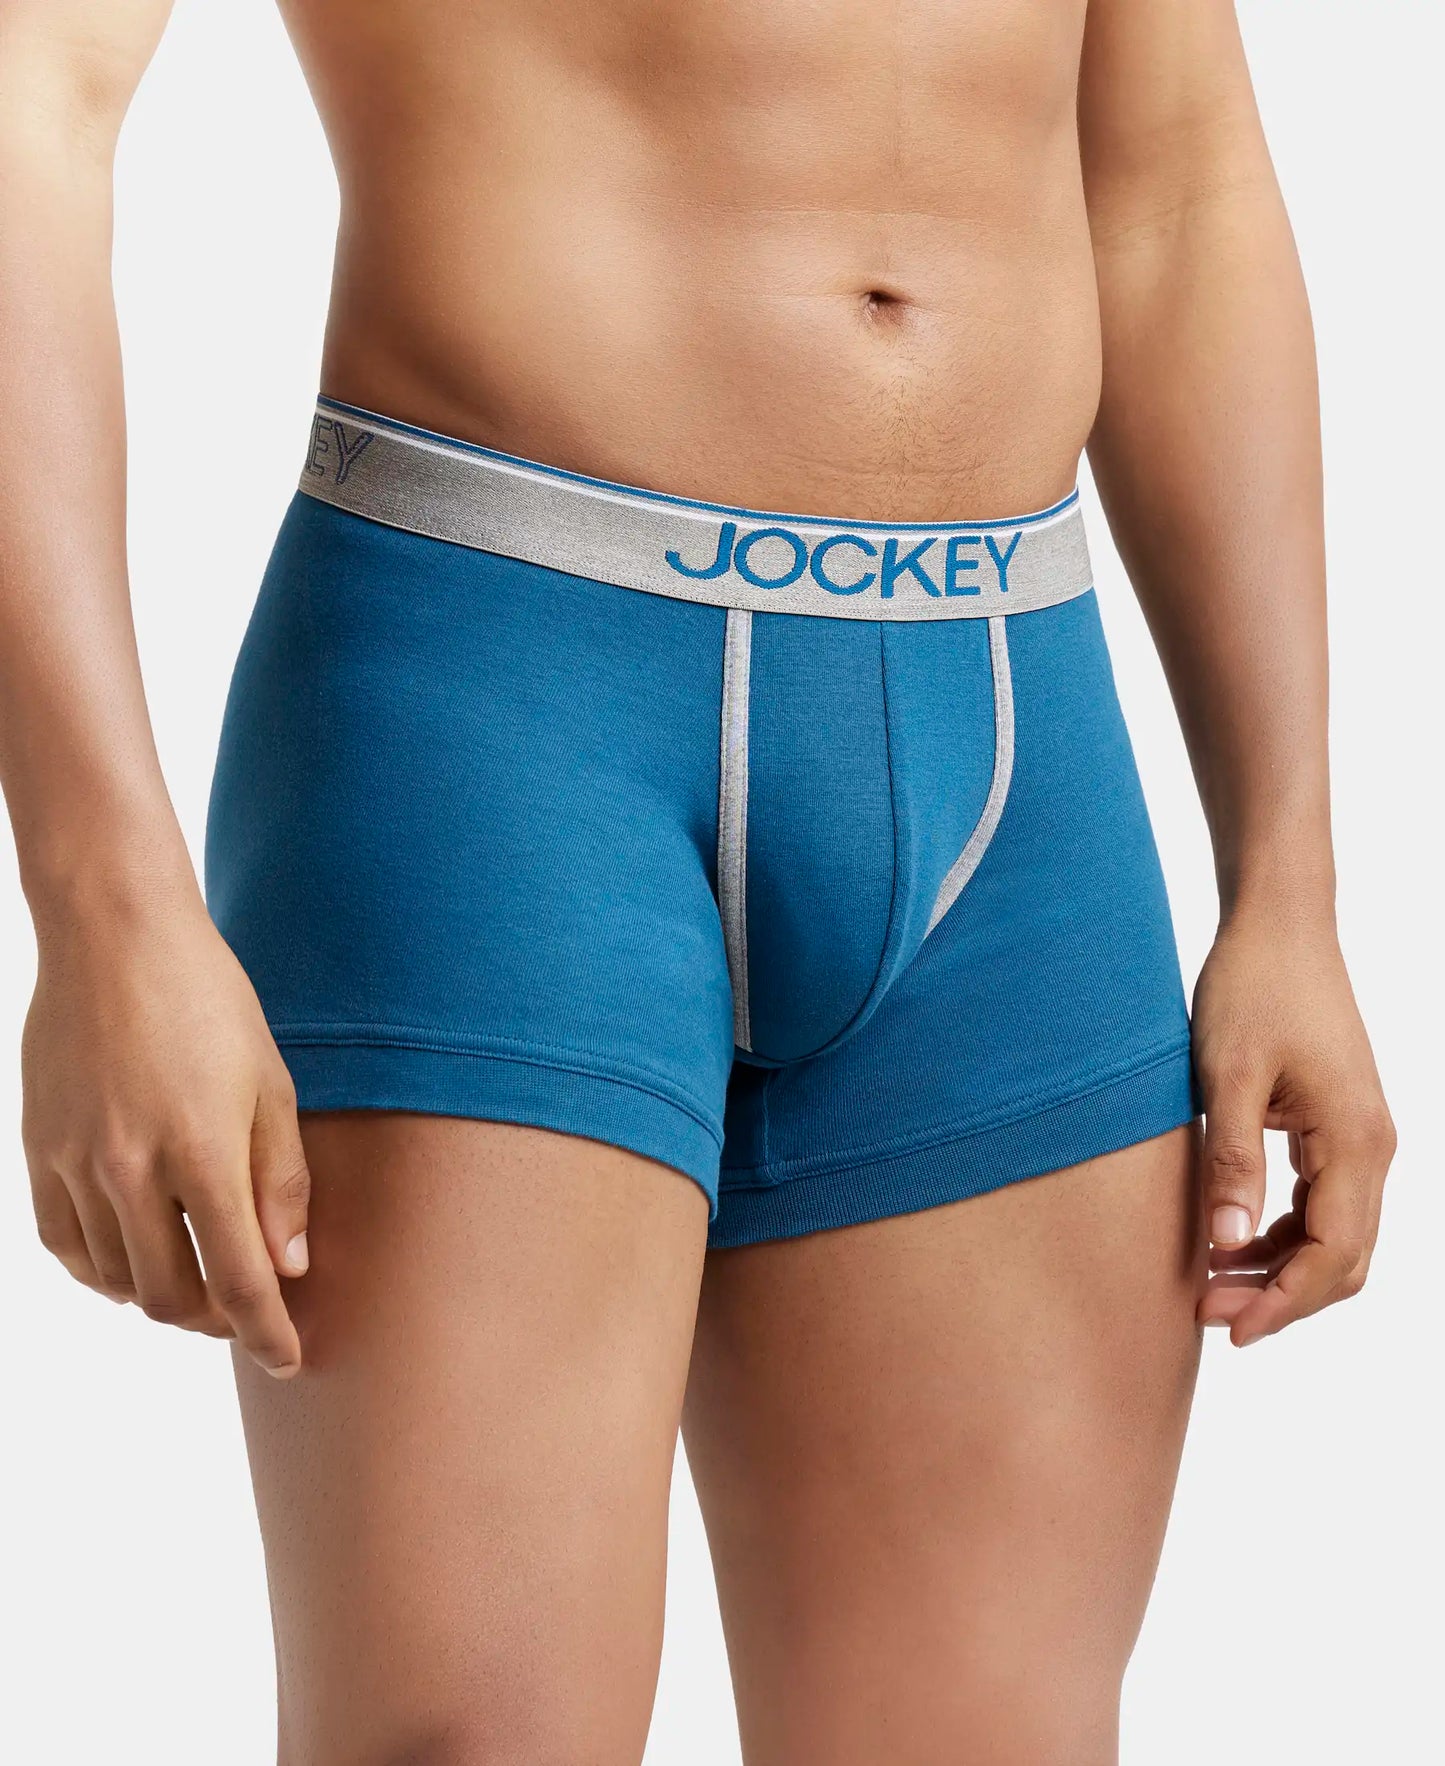 Super Combed Cotton Rib Solid Trunk with Ultrasoft Waistband - Seaport Teal-3